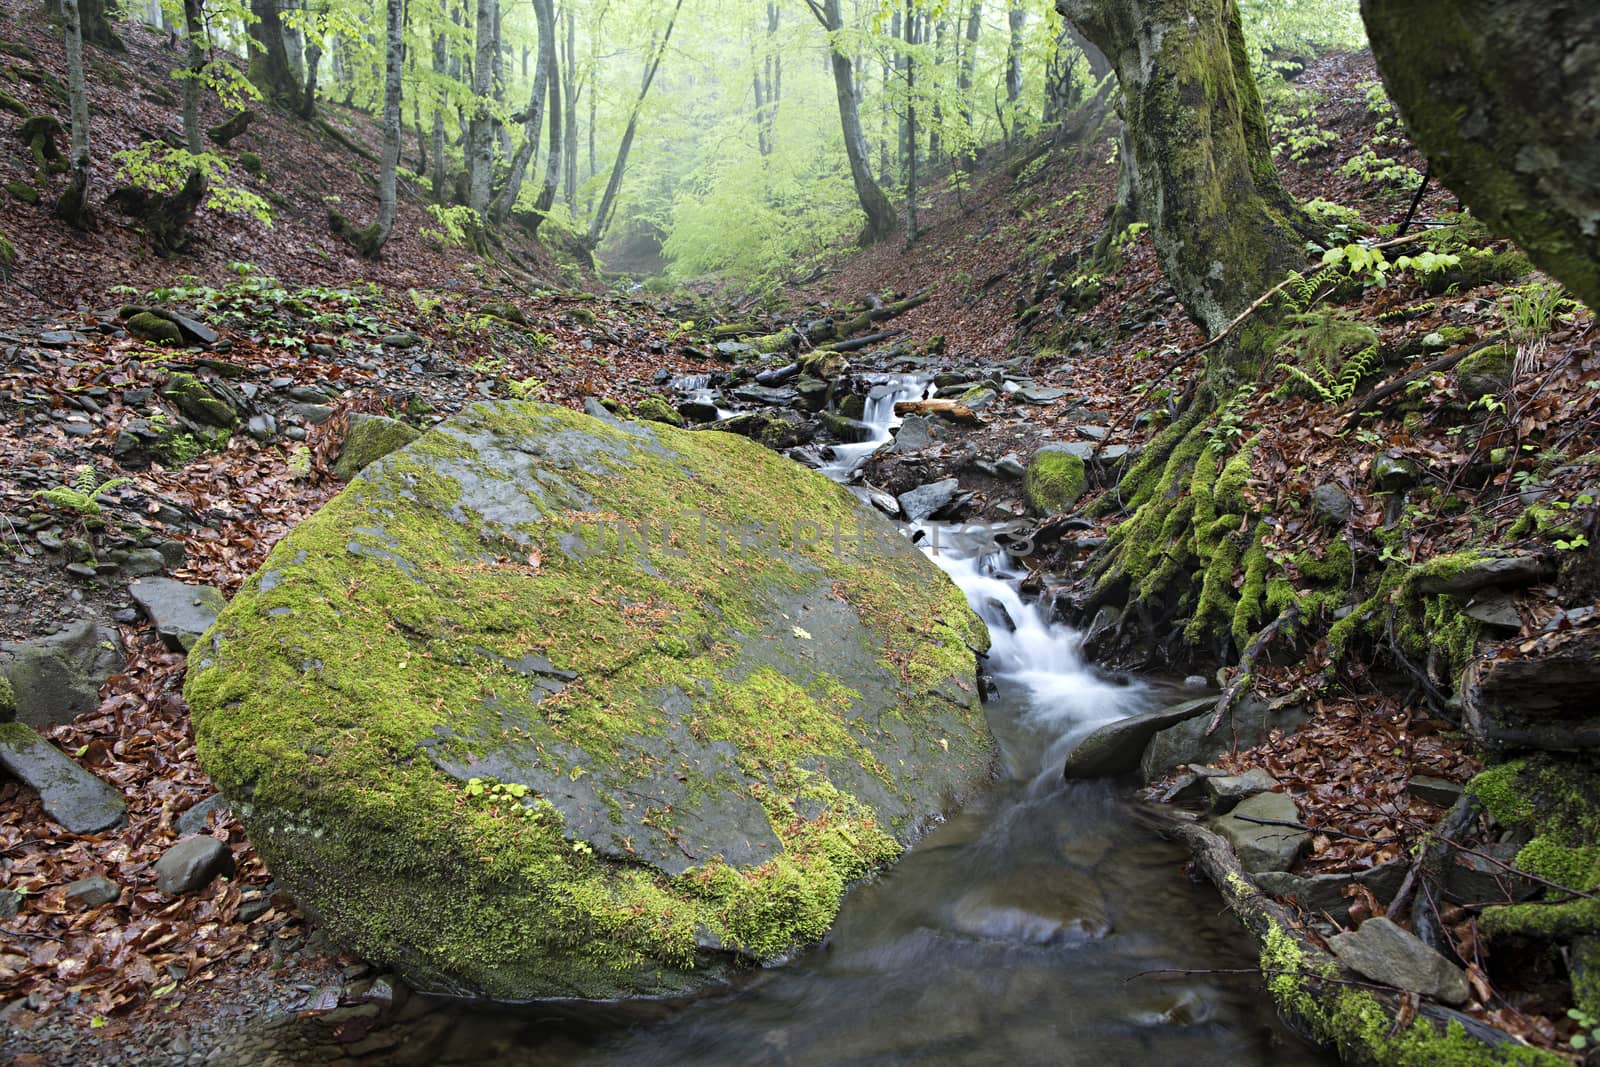 In the damp forest lies a large boulder on the path of a mountainous rushing river. Carpathians. Ukraine